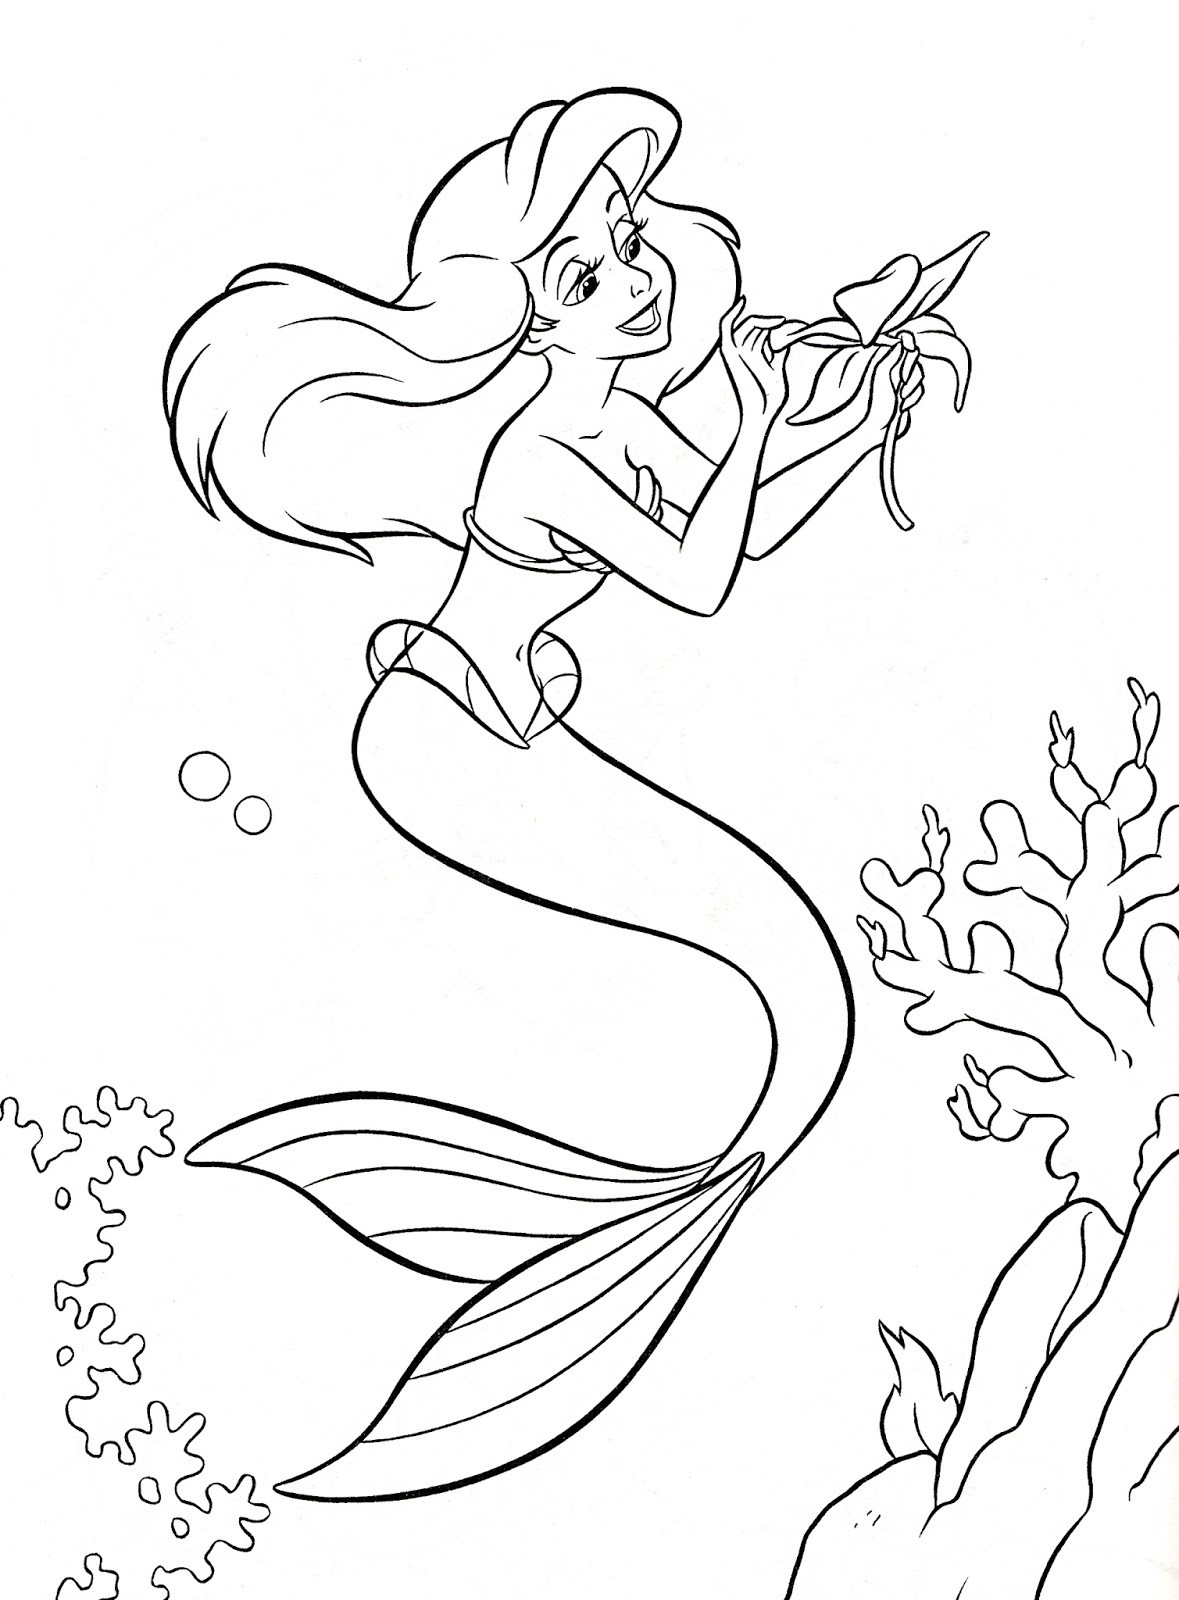 The Little Mermaid Coloring Pages
 Under The Sea Coloring Pages to Print